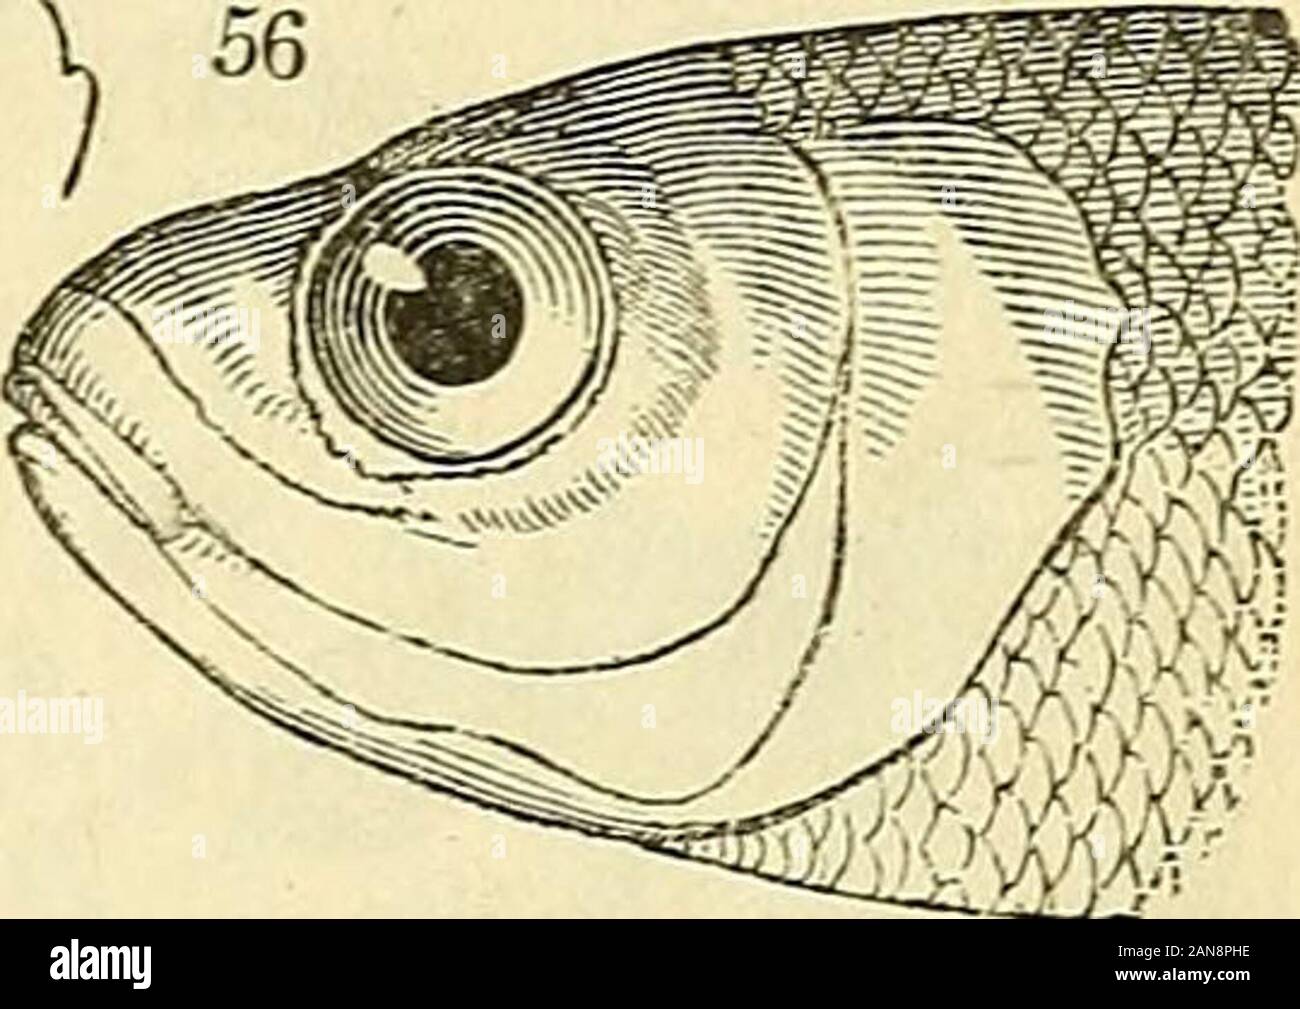 The natural history of fishes, amphibians, & reptiles, or monocardian animals . 5.b.) General formand fins of Sargus; but the jaws area Httle produced; the front teethshaped like those of Sargus, are placed on theanterior extremities of the jaws, and point forwards ;those on the sides very minute. C. fasciata Siv. Cuv. pi. 144. Pagellus Cuv. Body more lengthened and fusiformthan in Pagrus ; the head more pointed; anteriorcanines crowded, conic, and slender; pectorals rather lengthened. P. erythrinus. Bl. pi. 274. LitJwgnathus ^v:. Body fusiform; head lengthened;mouth terminal , very small; the Stock Photo